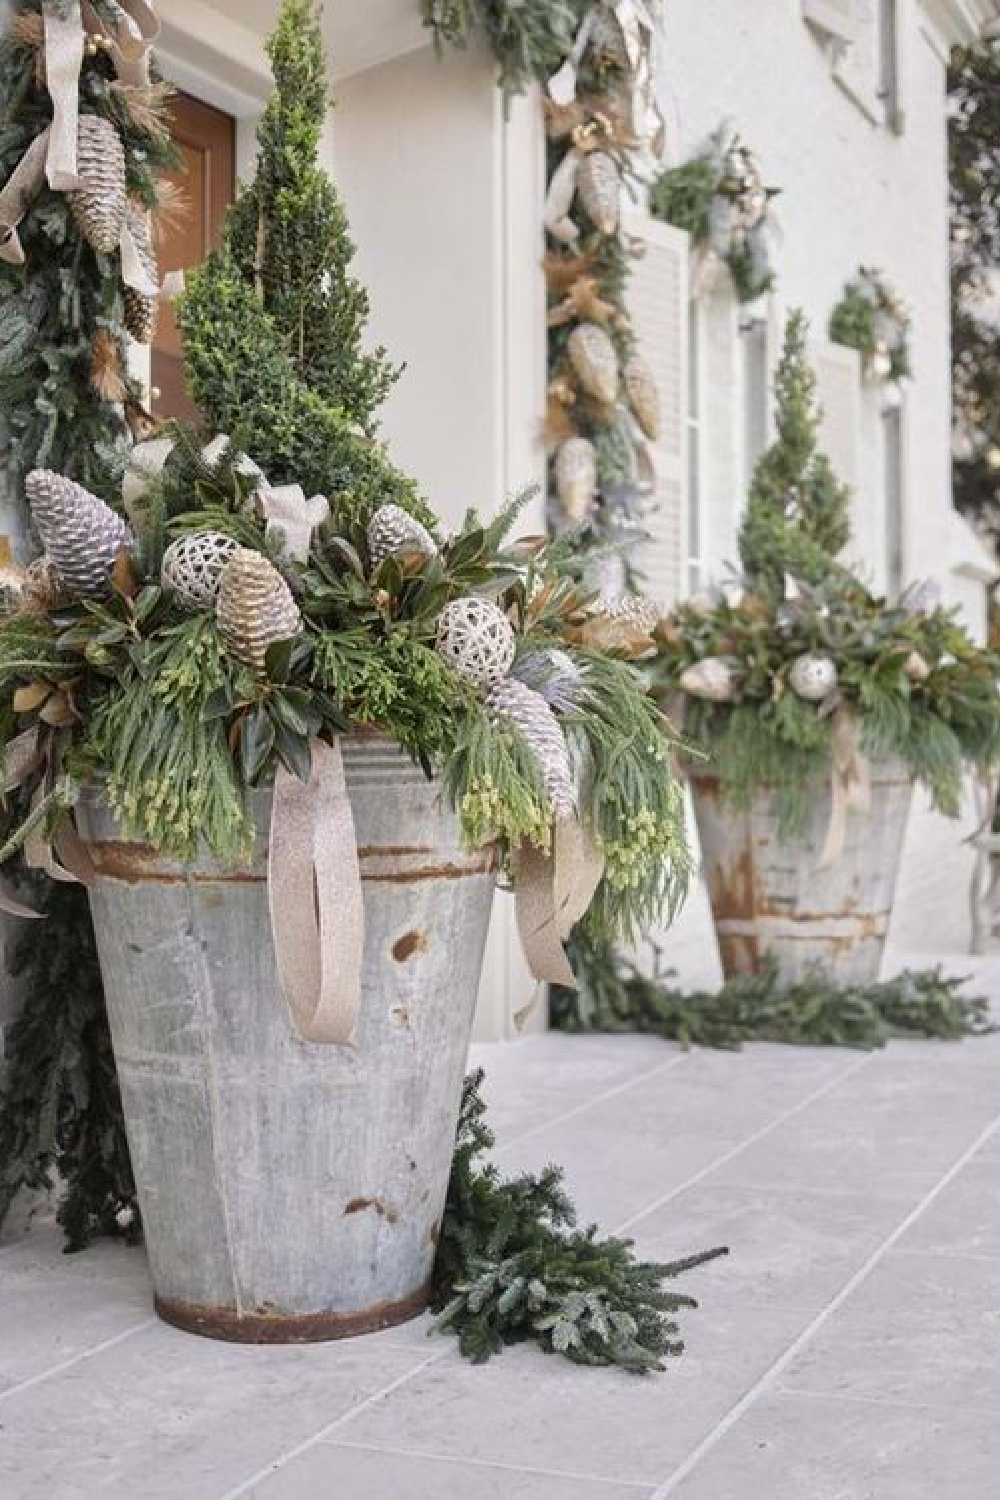 Magnificent Christmas decorated porch with large scale topiary planters, fresh greenery, and ribbon - Home for Holidays Atlanta. #christmasporch #holidayhouse